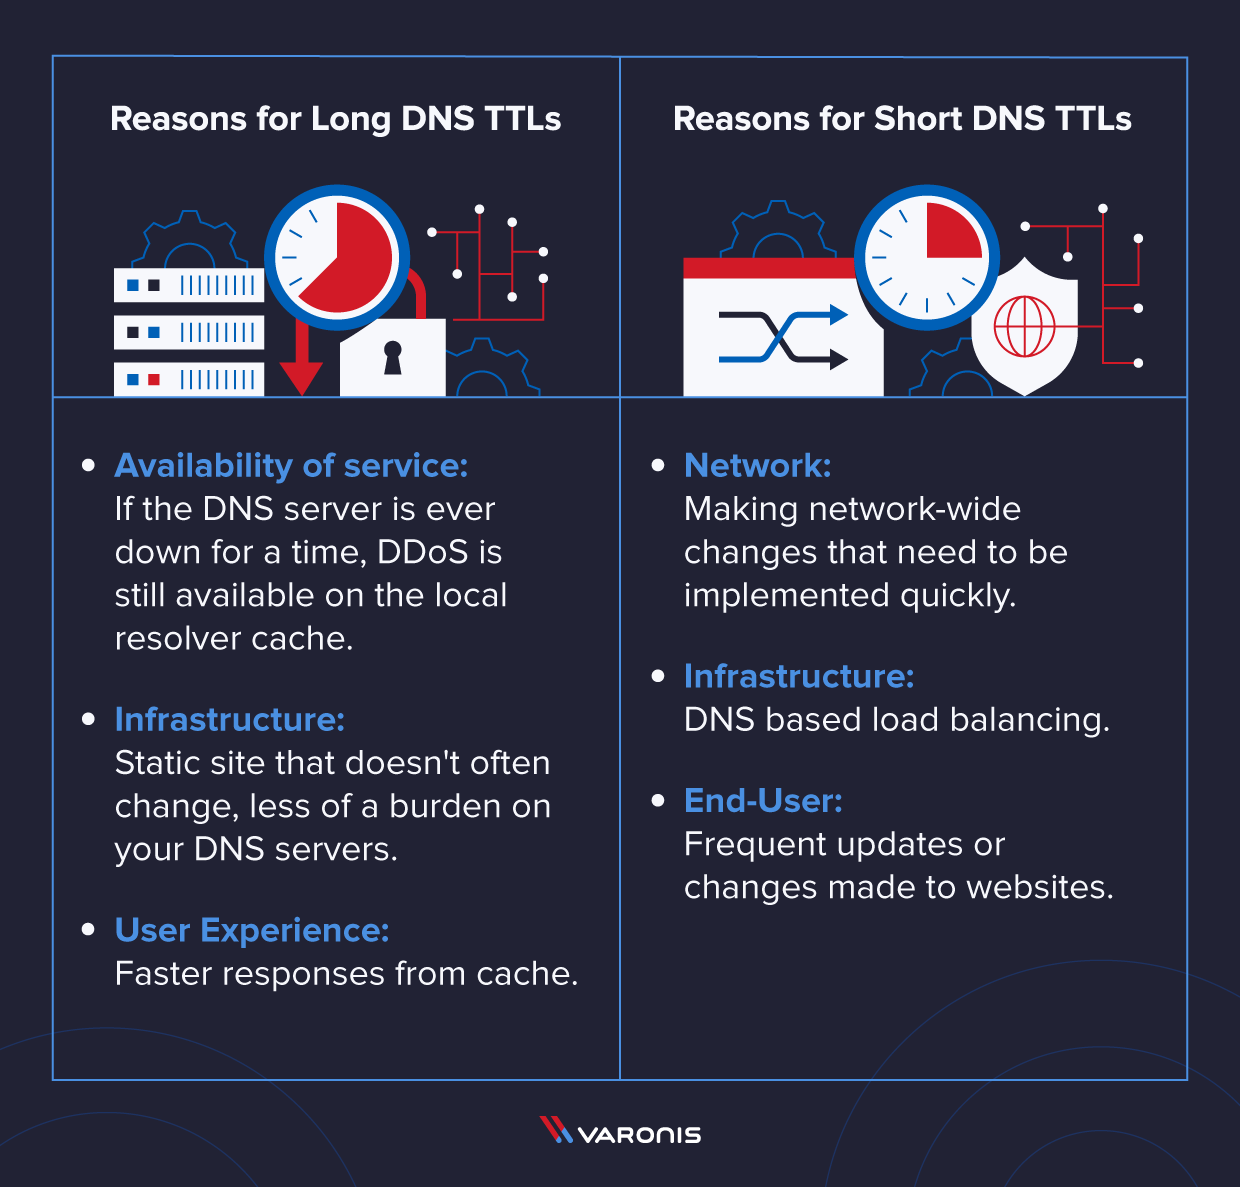 list of reasons for short and long DNS TTL